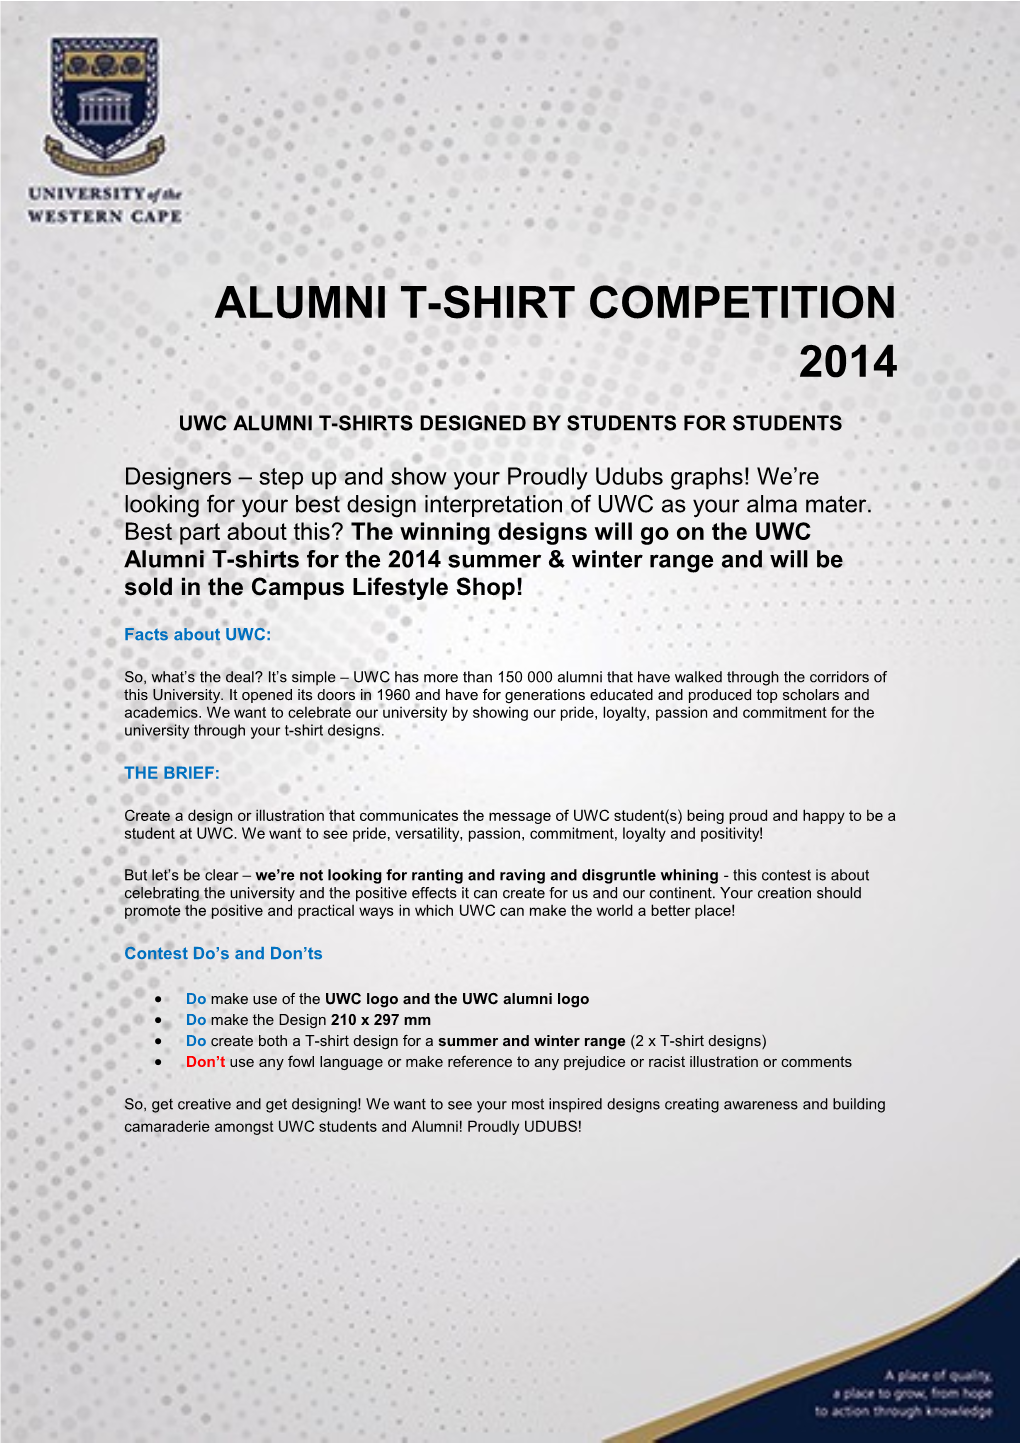 UWC Alumni T-Shirts Designed by Students for Students